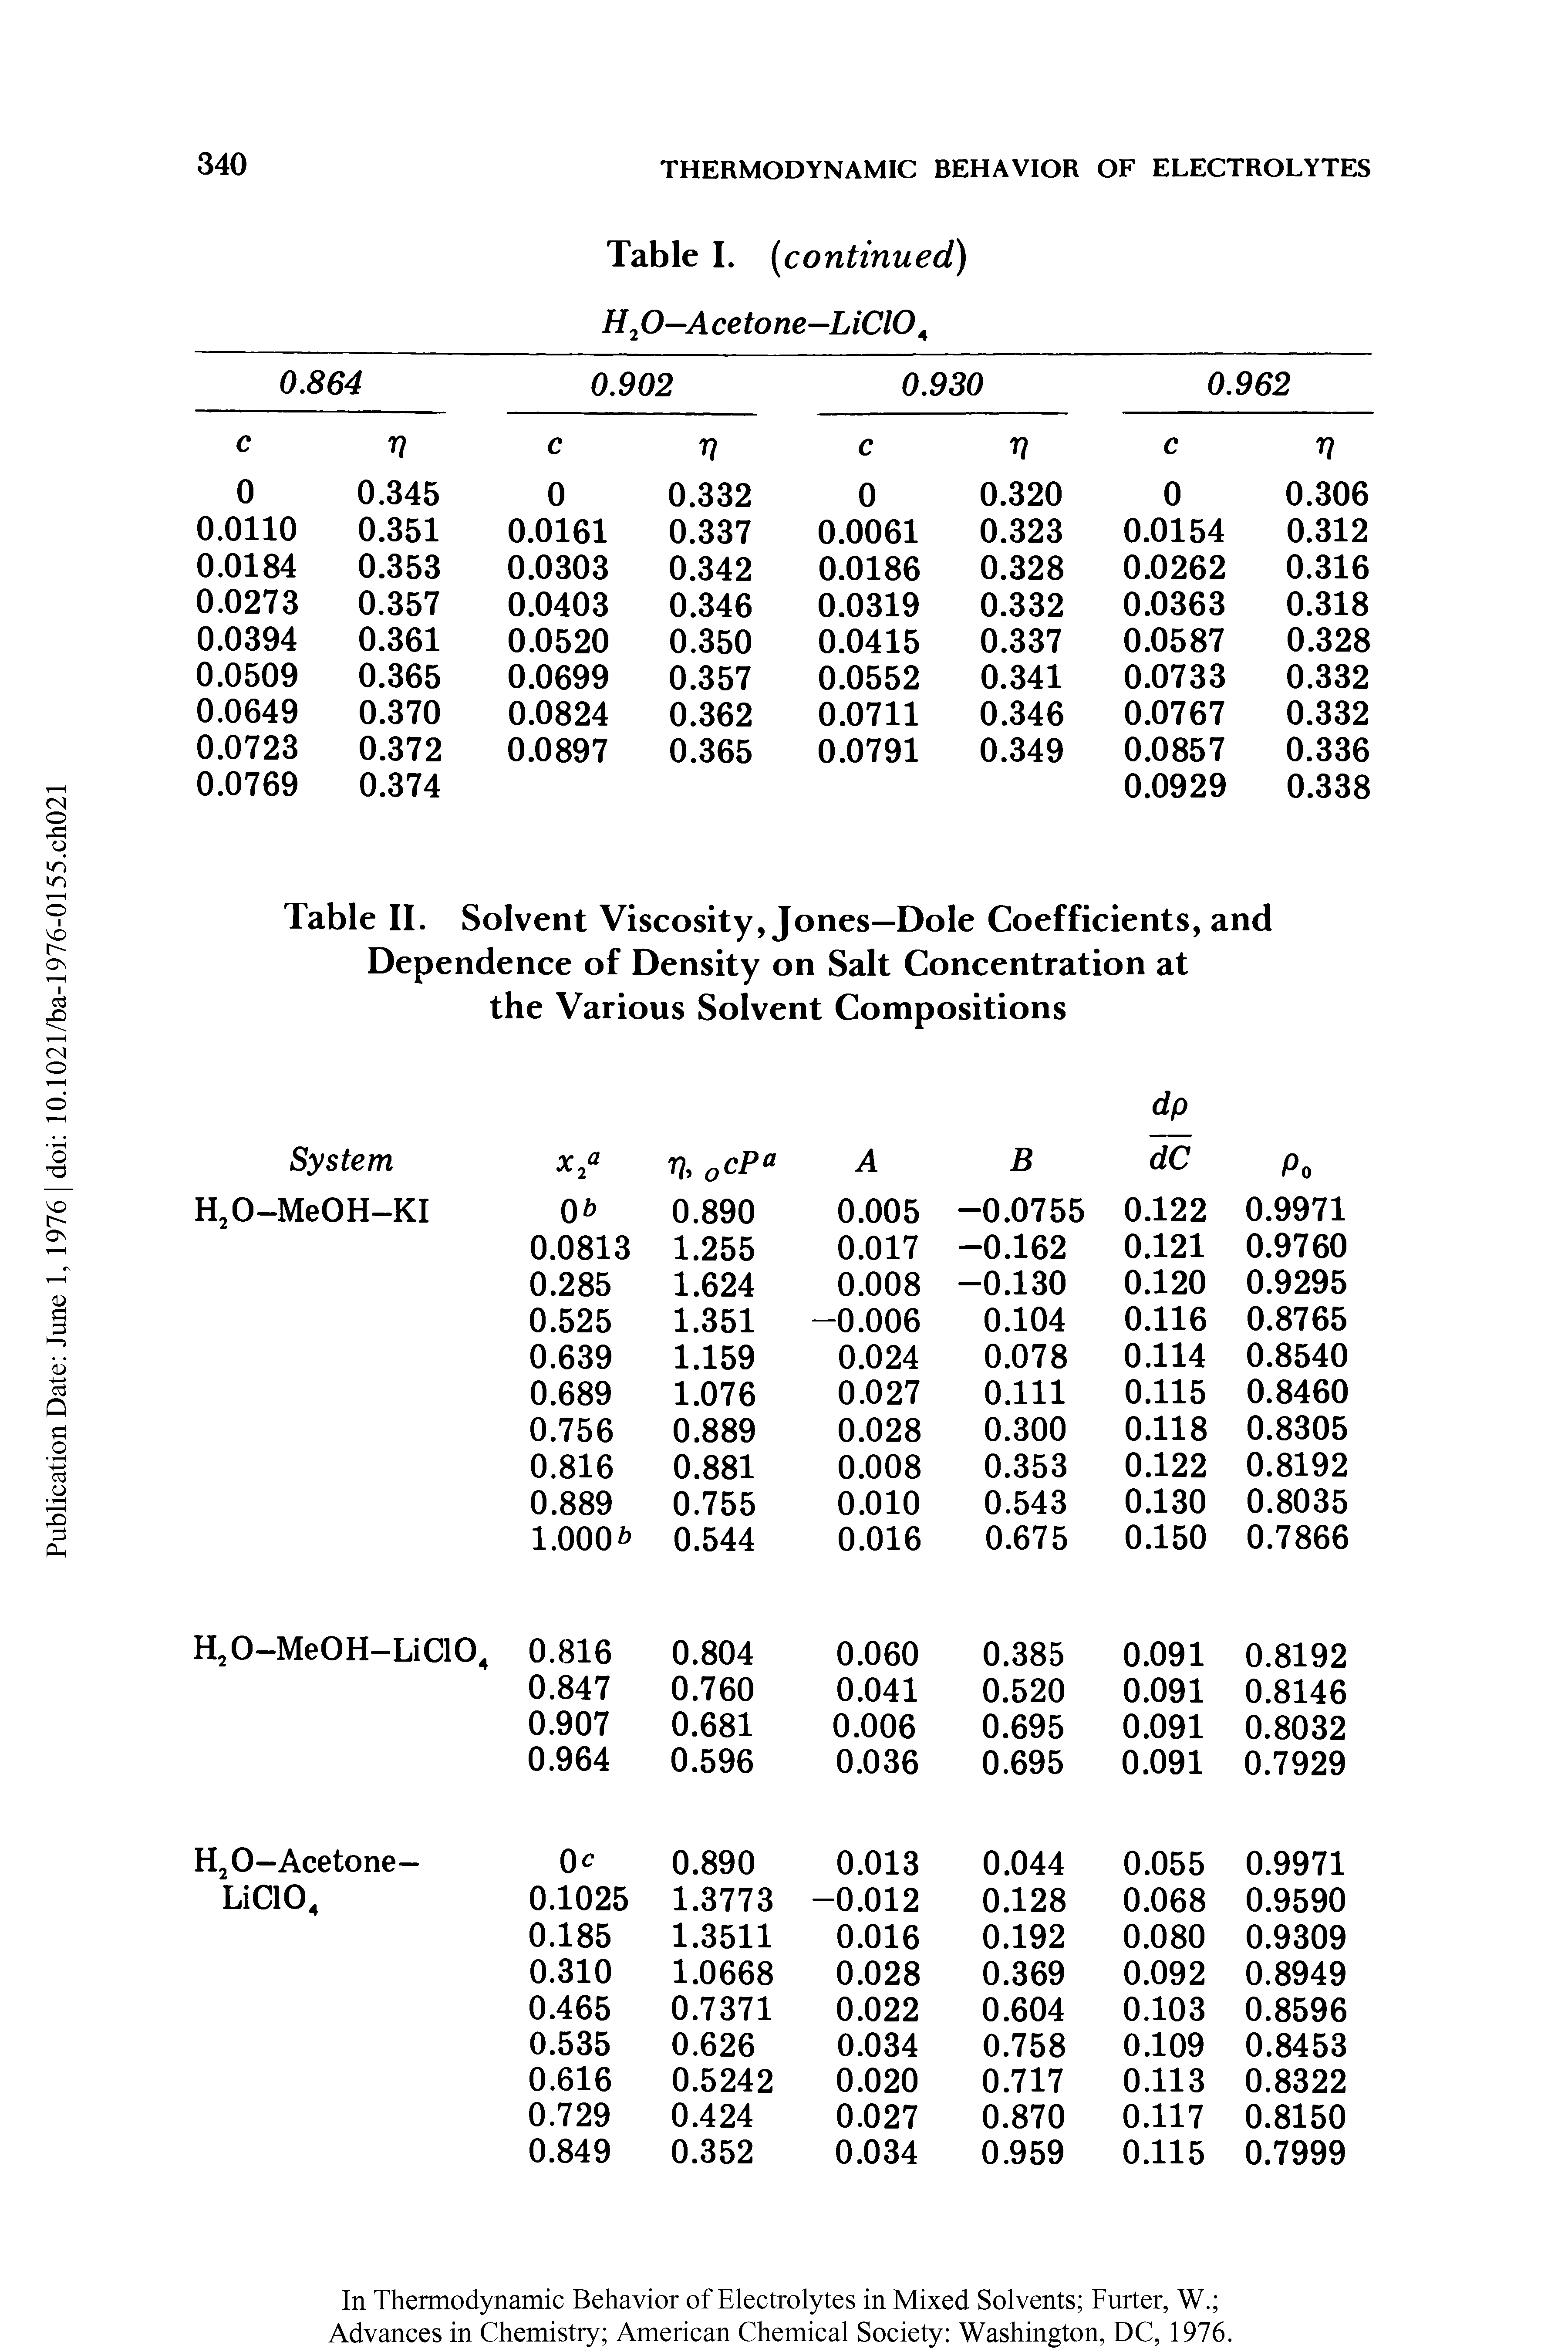 Table II. Solvent Viscosity, Jones—Dole Coefficients, and Dependence of Density on Salt Concentration at the Various Solvent Compositions...